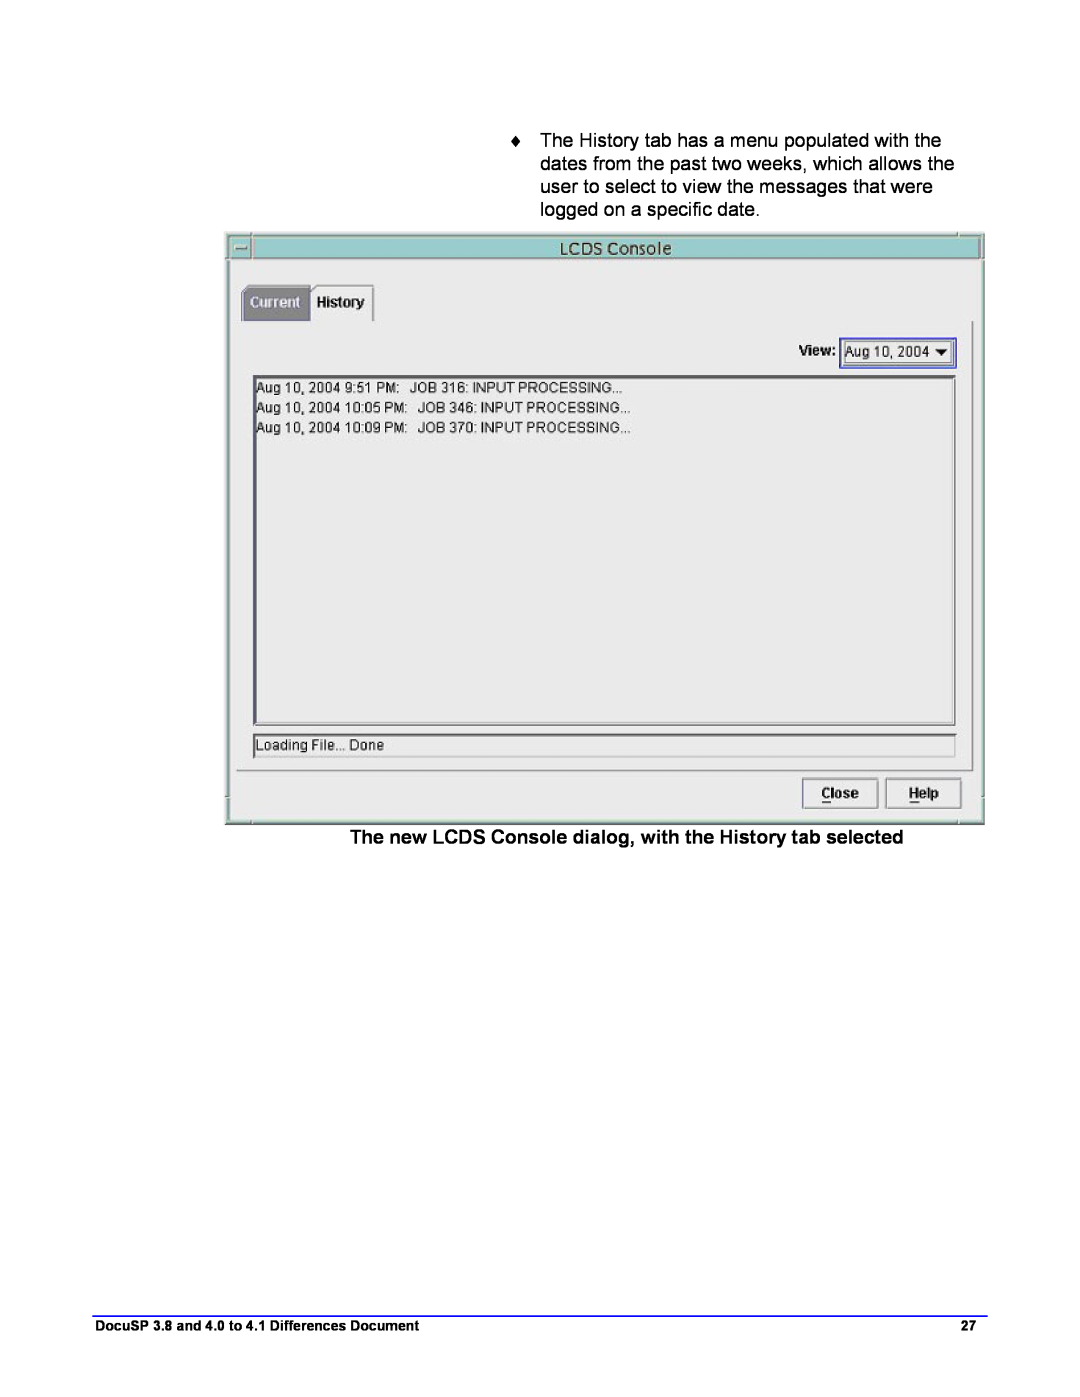 Xerox 4.2 The new LCDS Console dialog, with the History tab selected, DocuSP 3.8 and 4.0 to 4.1 Differences Document 